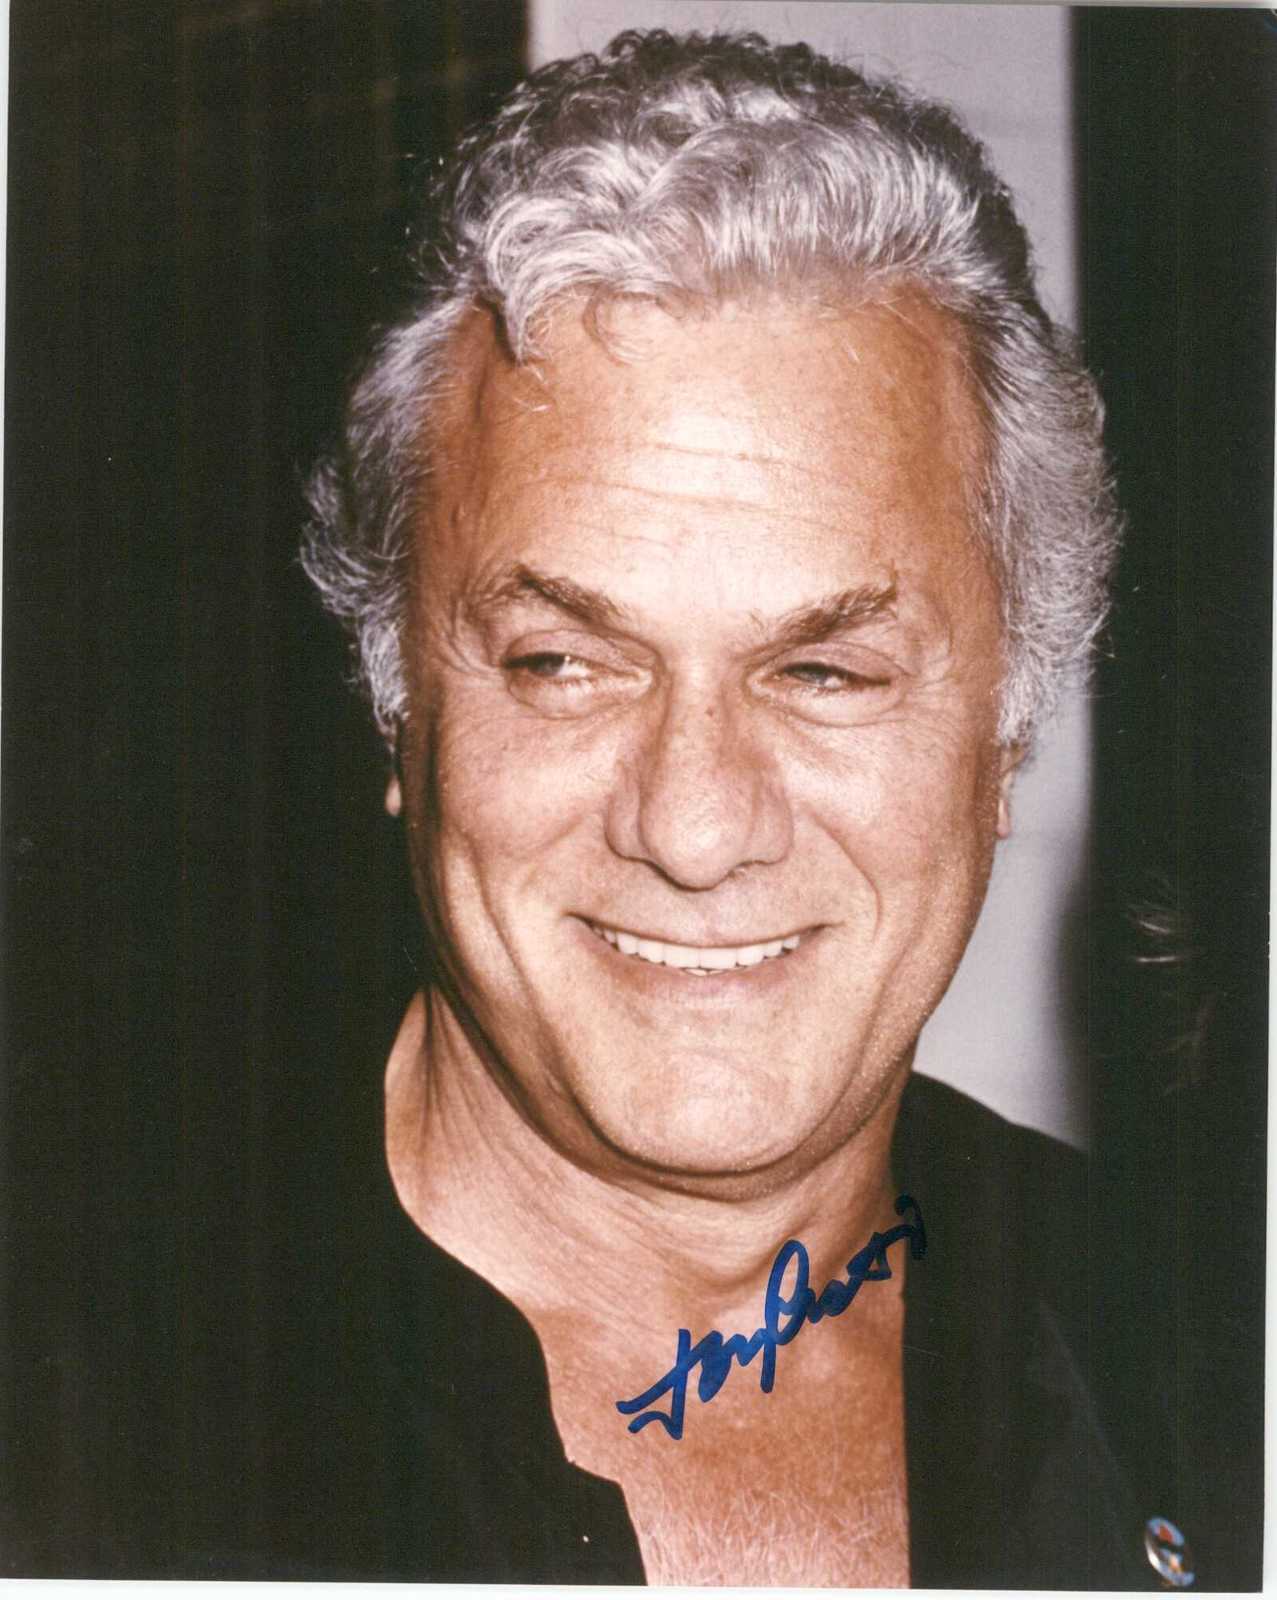 Tony Curtis (d. 2010) Signed Autographed Glossy 8x10 Photo - $39.99